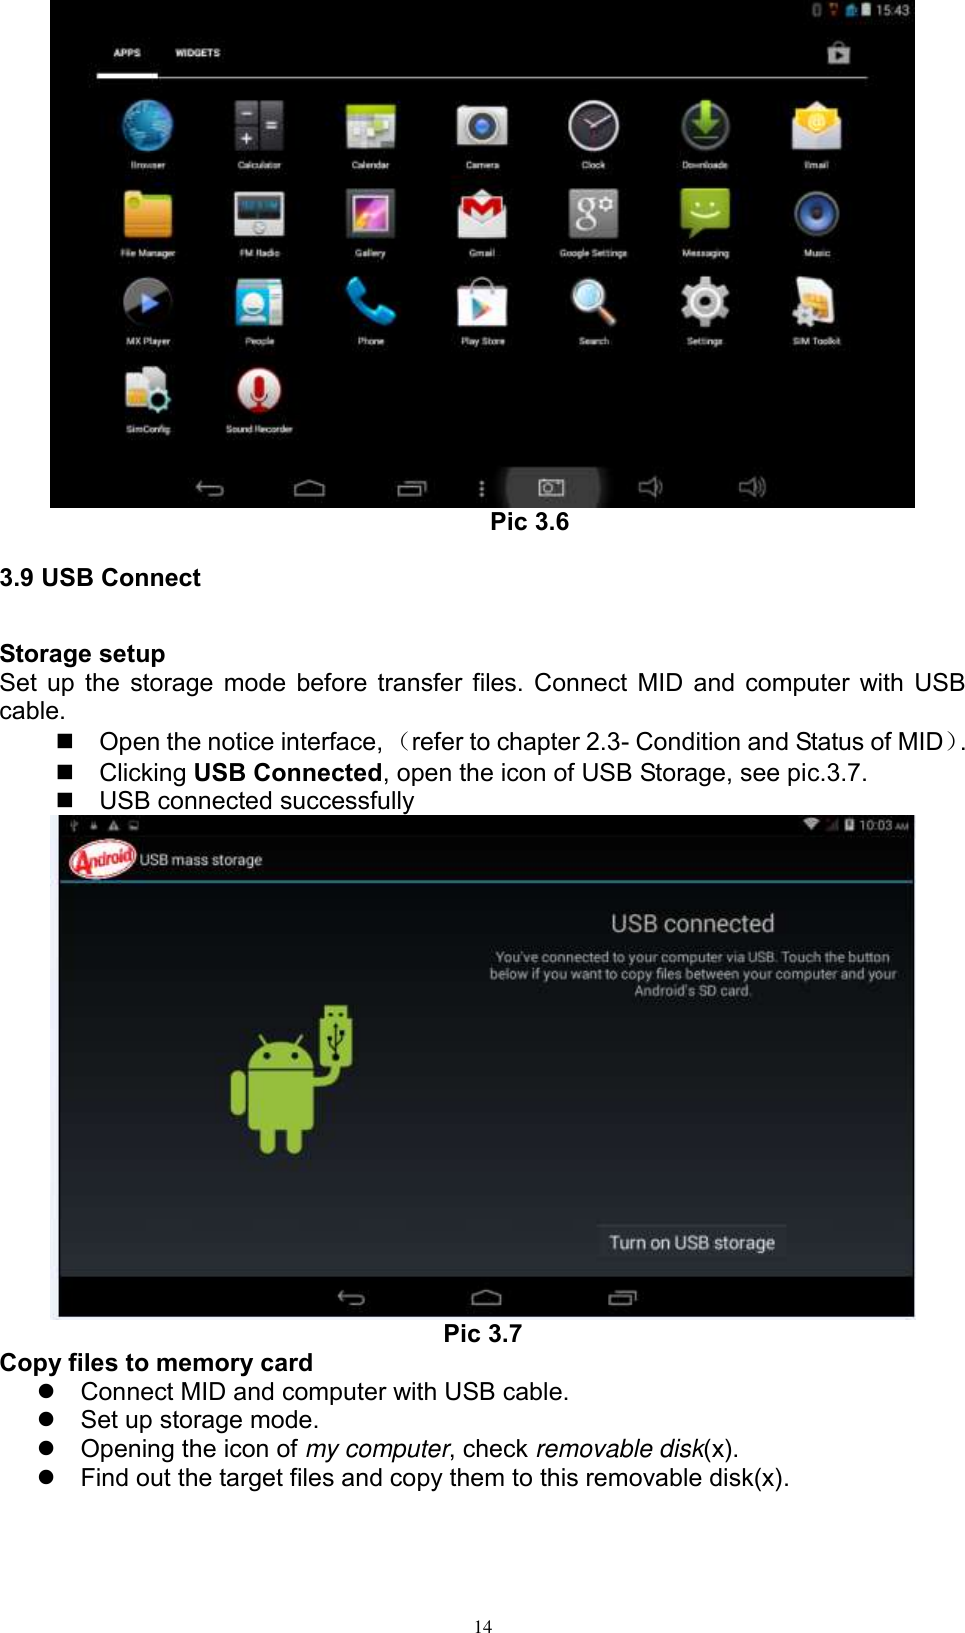      14  Pic 3.6 3.9 USB Connect Storage setup Set up the storage mode before transfer files. Connect MID and computer with USB cable.   Open the notice interface, （refer to chapter 2.3- Condition and Status of MID）.     Clicking USB Connected, open the icon of USB Storage, see pic.3.7.   USB connected successfully    Pic 3.7 Copy files to memory card   Connect MID and computer with USB cable.   Set up storage mode.   Opening the icon of my computer, check removable disk(x).   Find out the target files and copy them to this removable disk(x). 